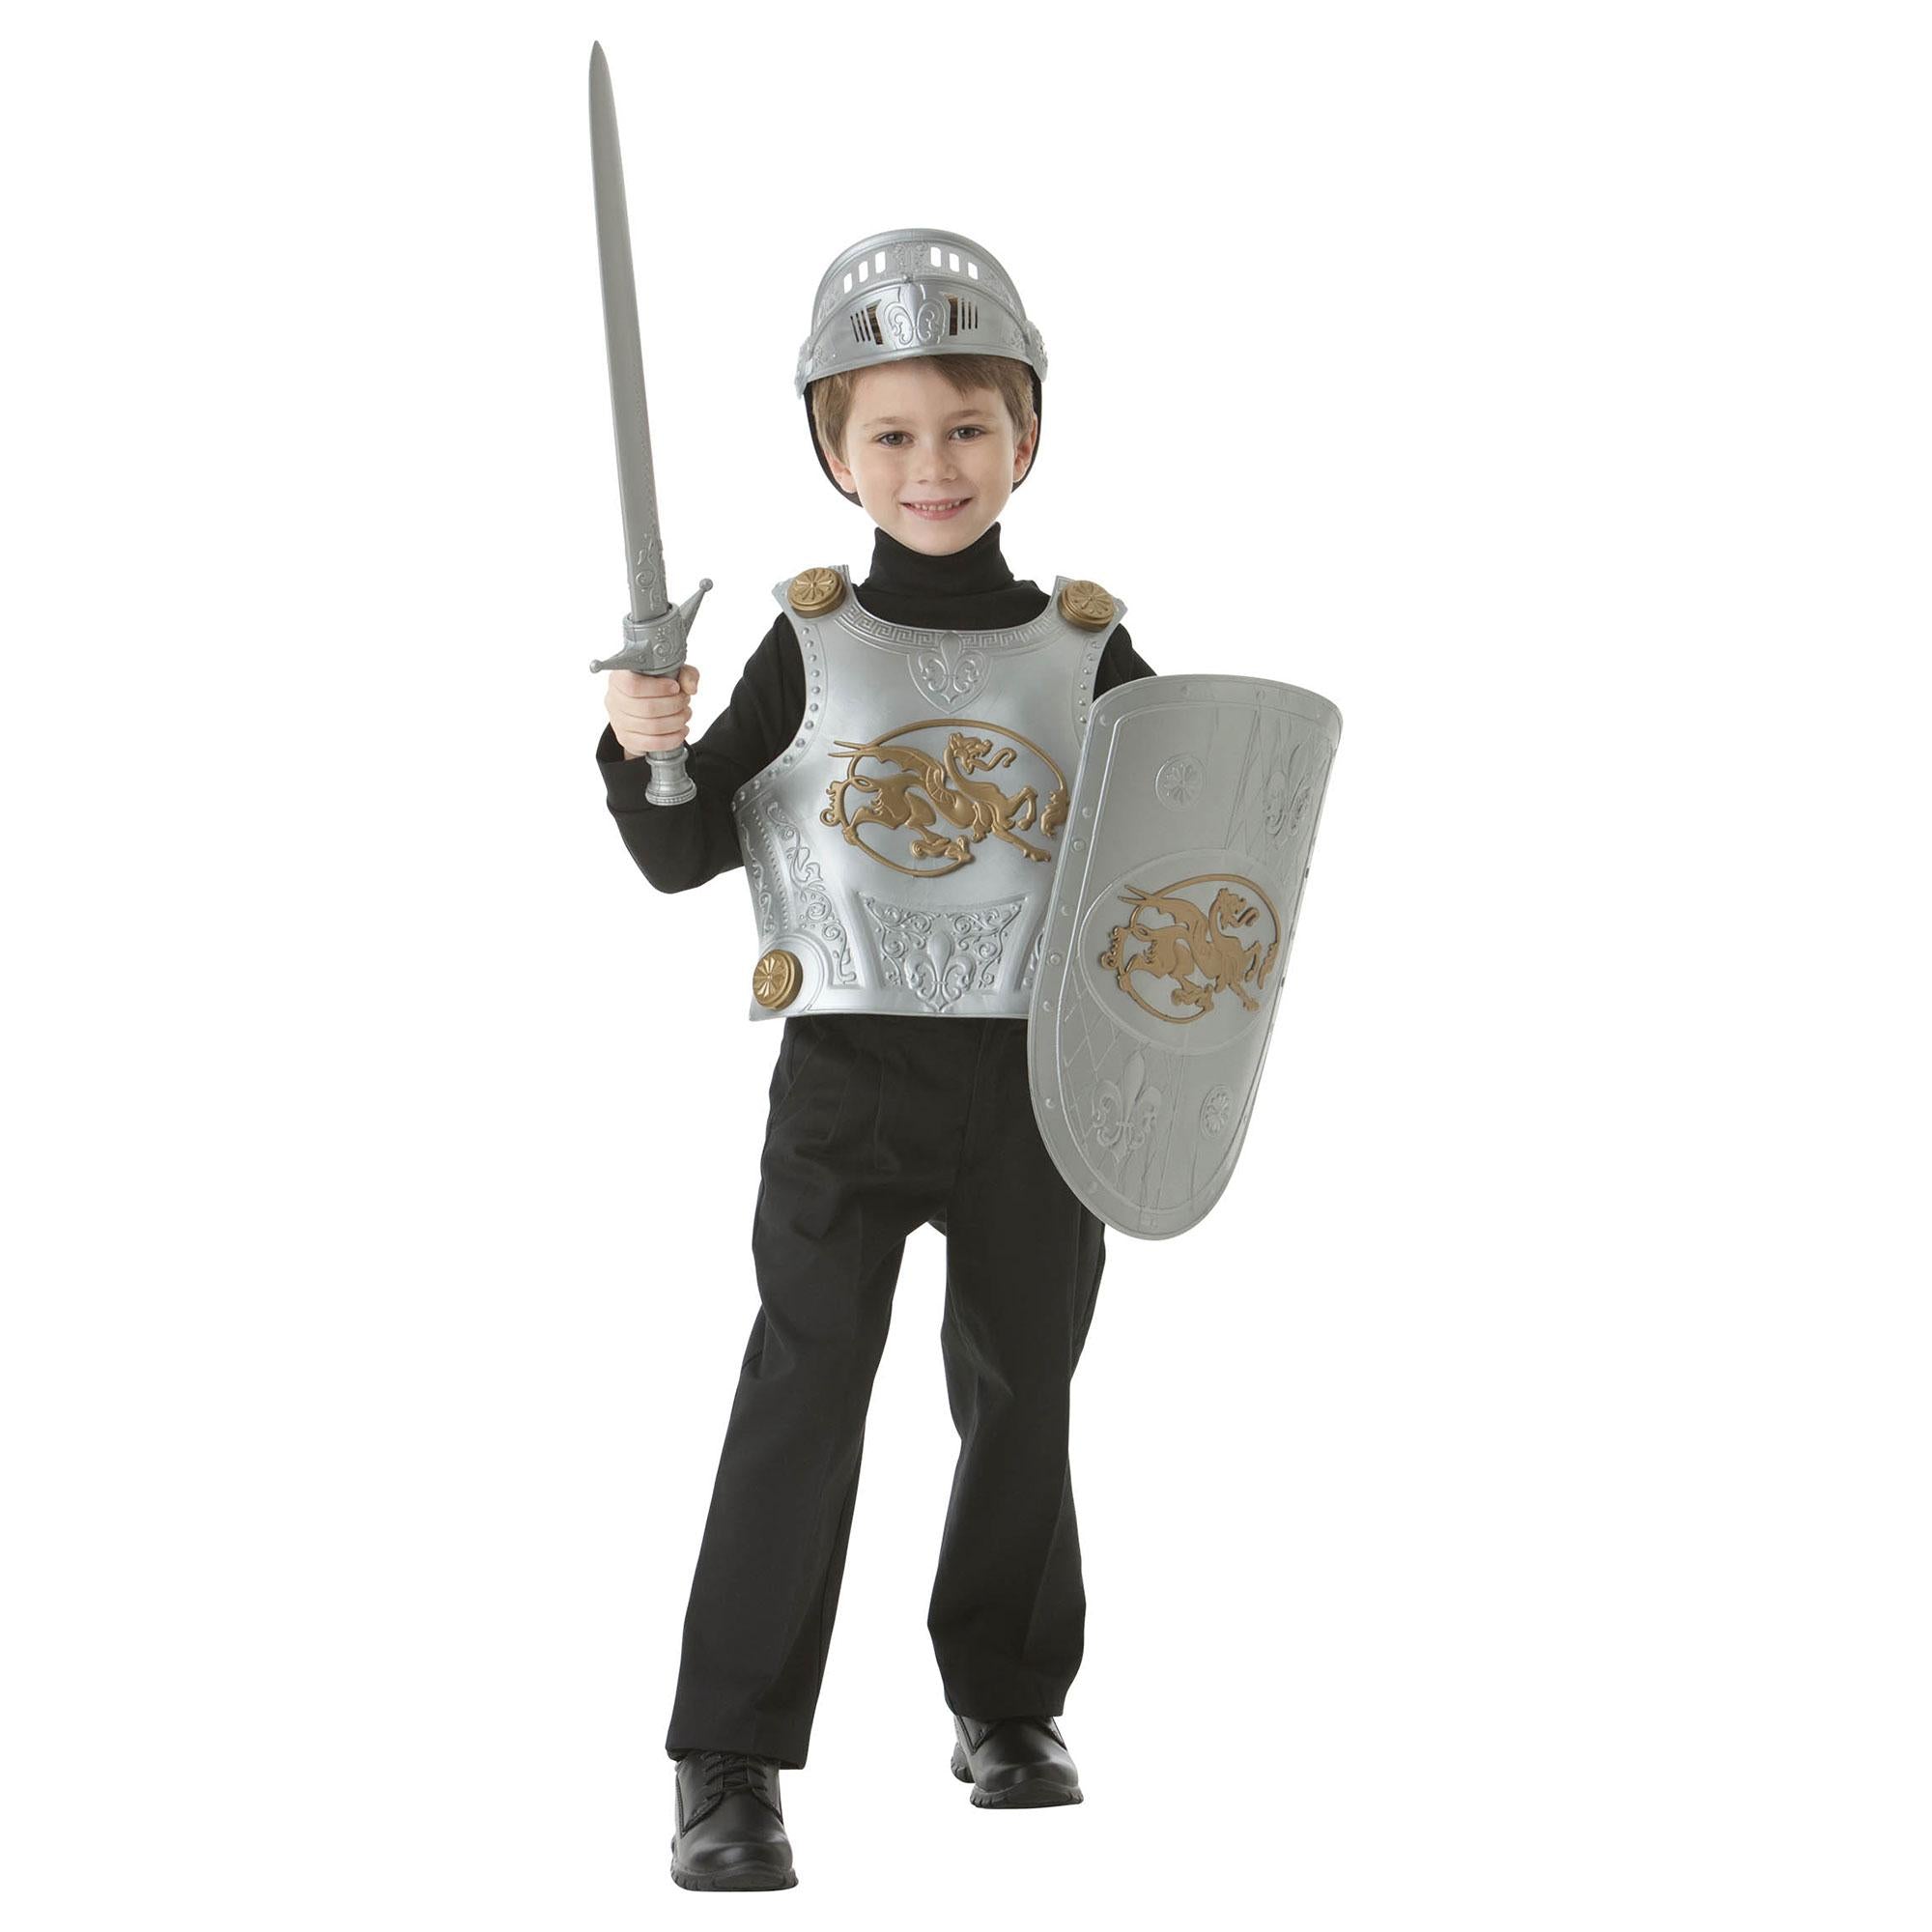 Crusader Play Set Costumes & Apparel - Party Centre